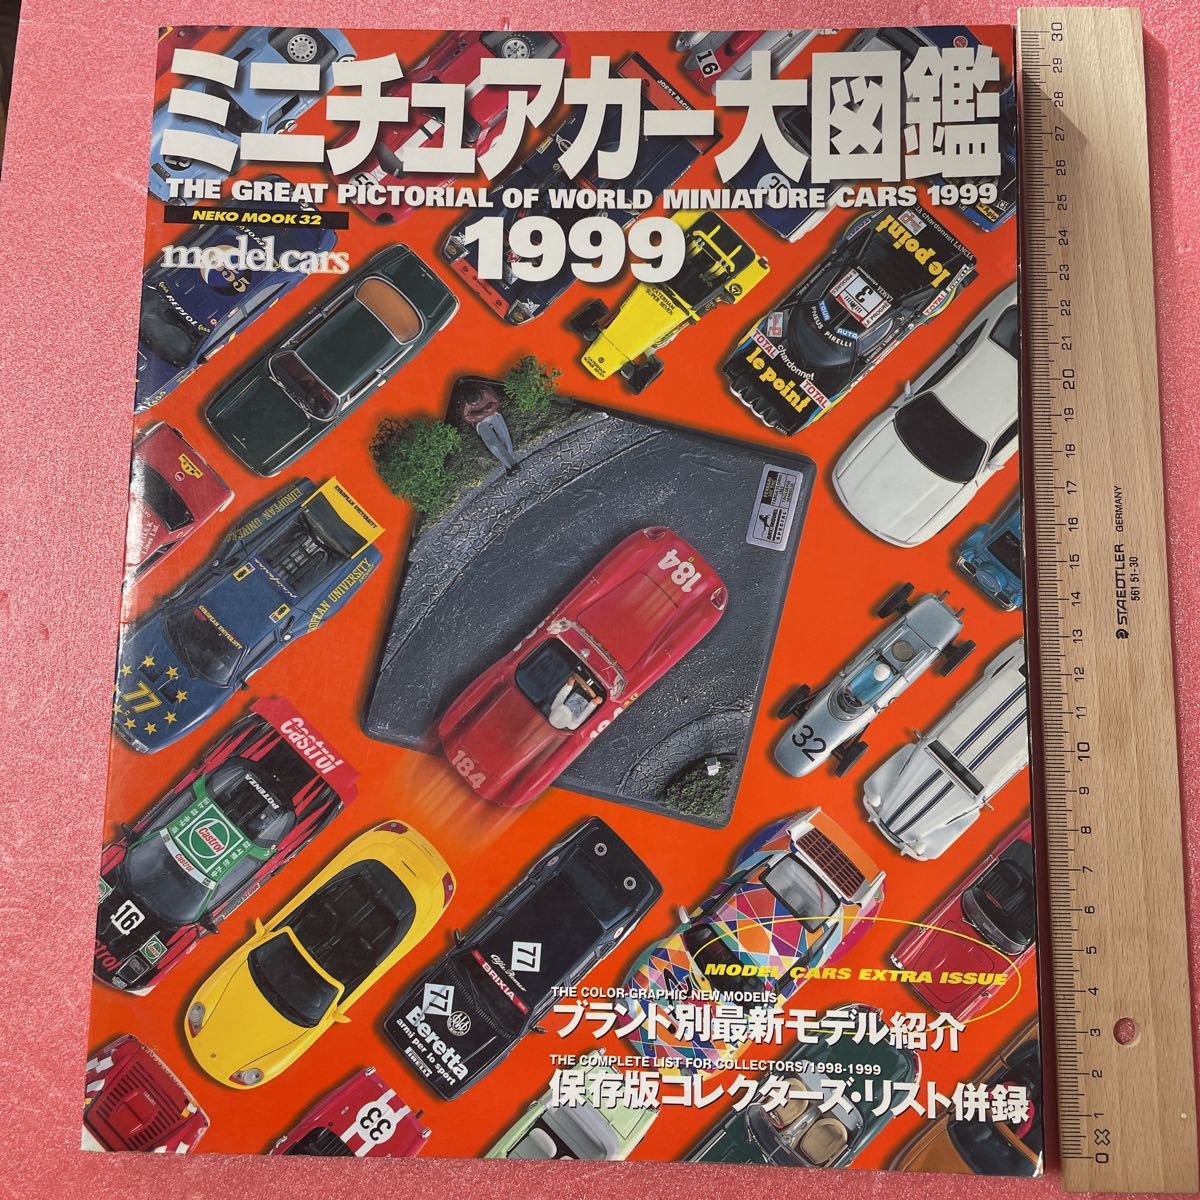 K1-142 送料込 【ミーチュアカー大図鑑 THE GREAT PICTORIAL OF WORLD COLLECTORS/1998-1999 保存版コレクターズ・リスト併録